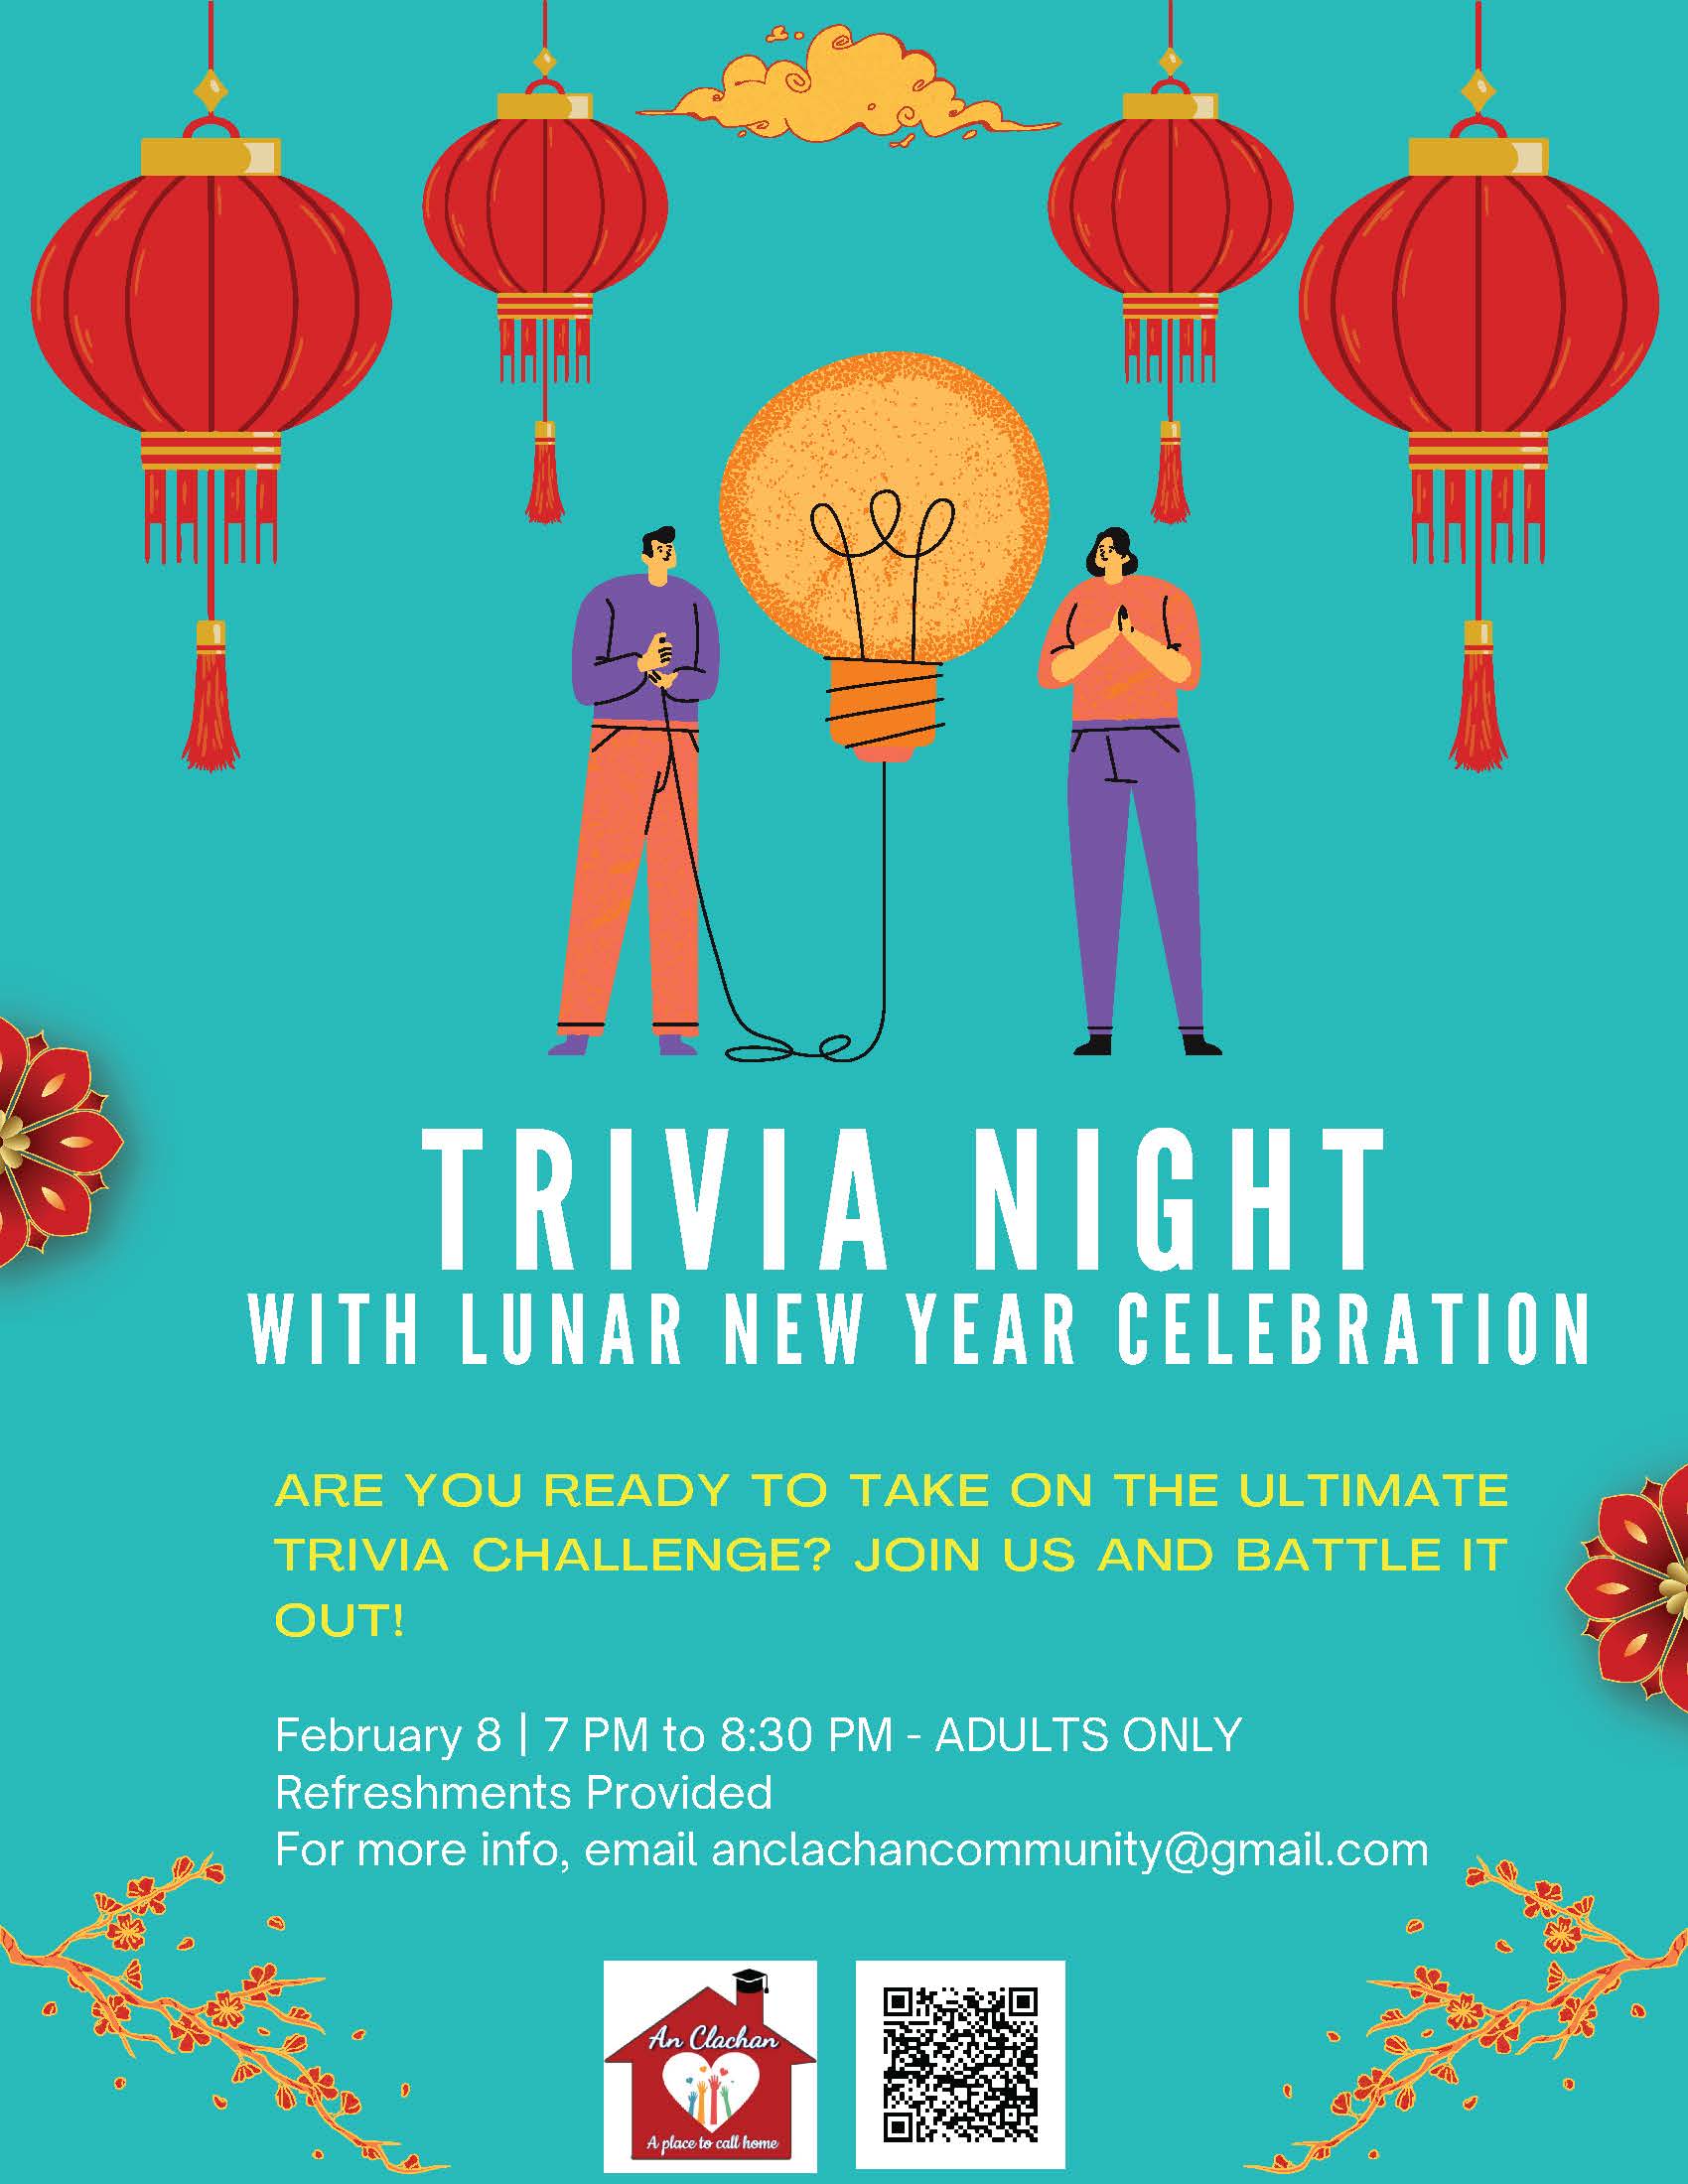 Trivia Night with Lunar New Year Celebration. Are you ready to take on the ultimate trivia challenge? Join us and battle it out! February 8th 7:00PM to 8:30PM - Adults Only. Refreshments provided. For more info, email anclachancommunity@gmail.com